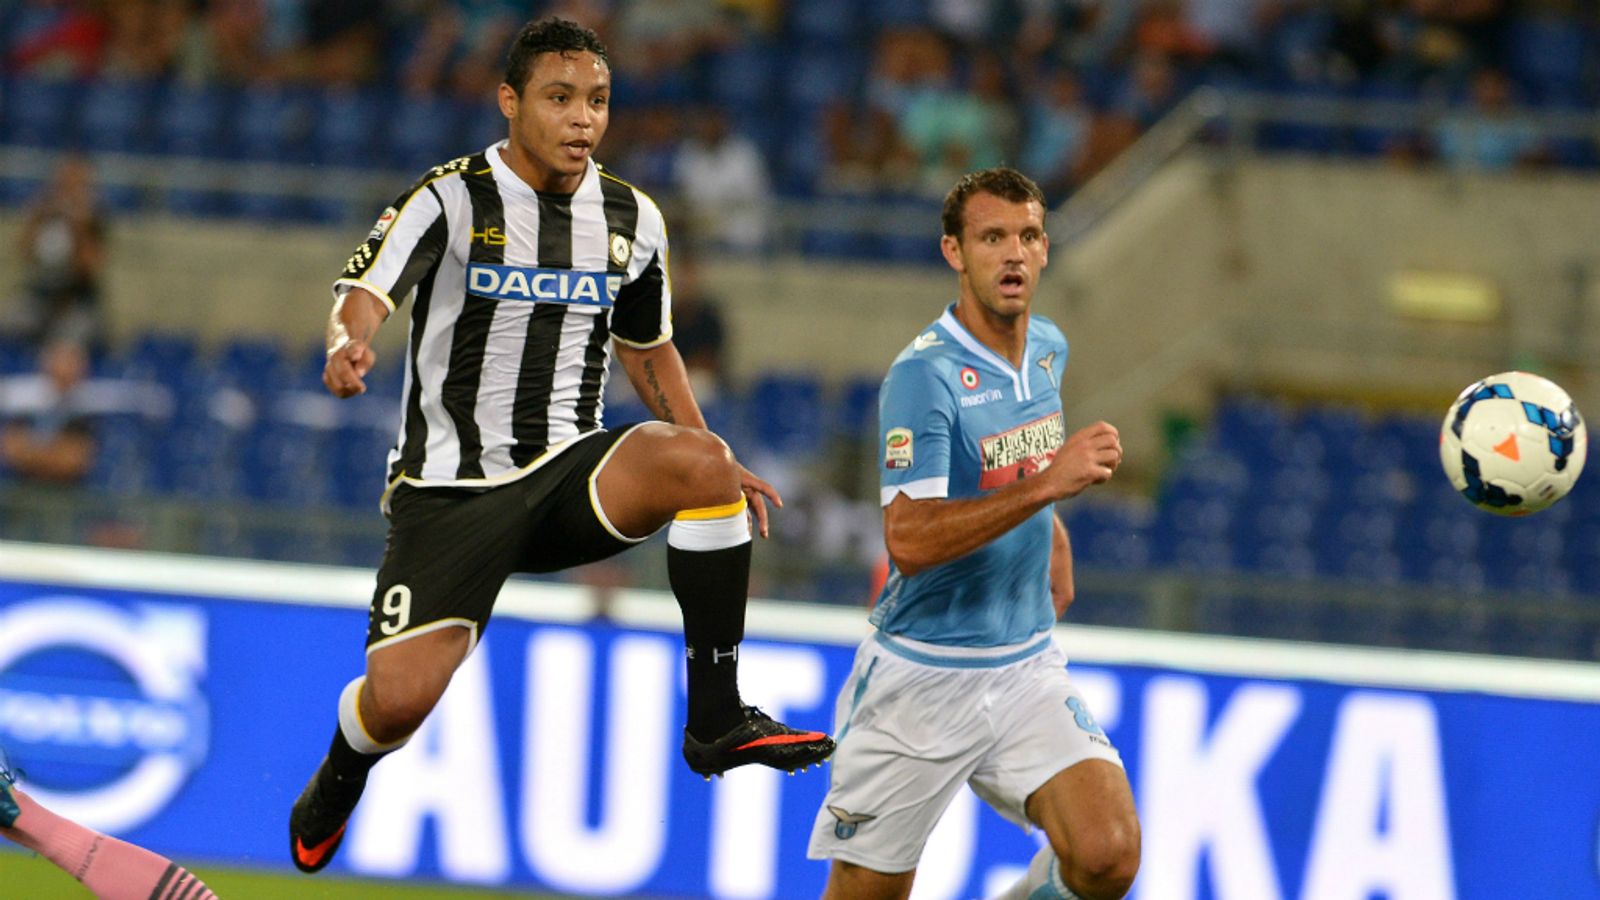 Colombian striker Luis Muriel commits to stay with Udinese ...